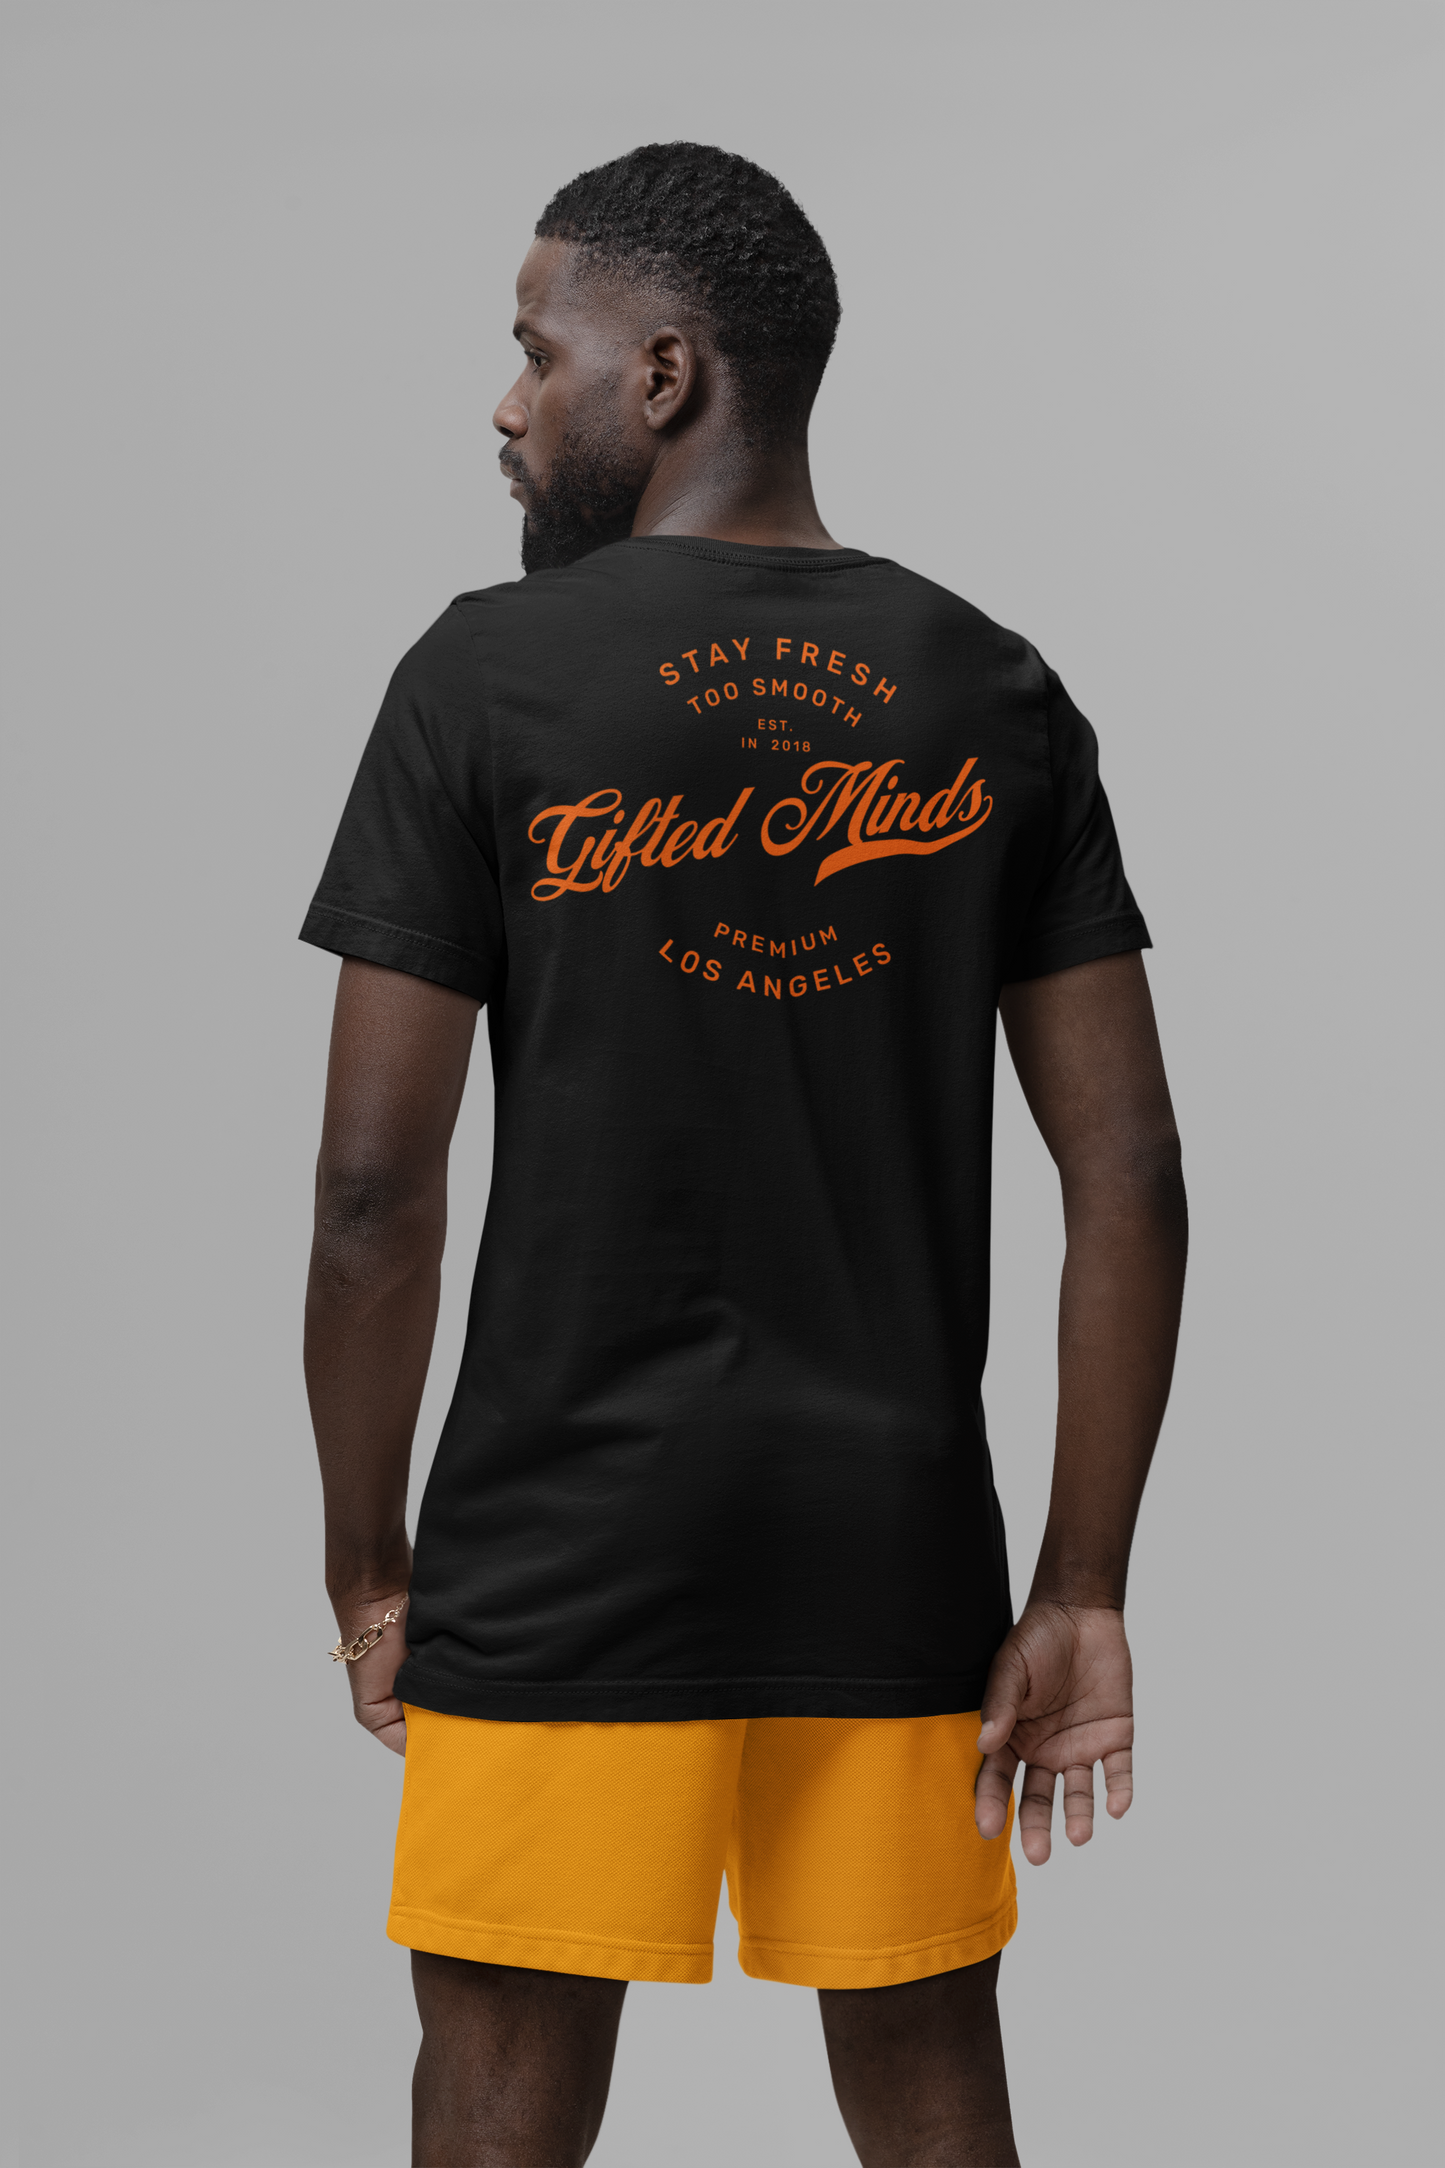 Gifted Minds Vintage/Retro Short Sleeve Tee - GFTD MNDS